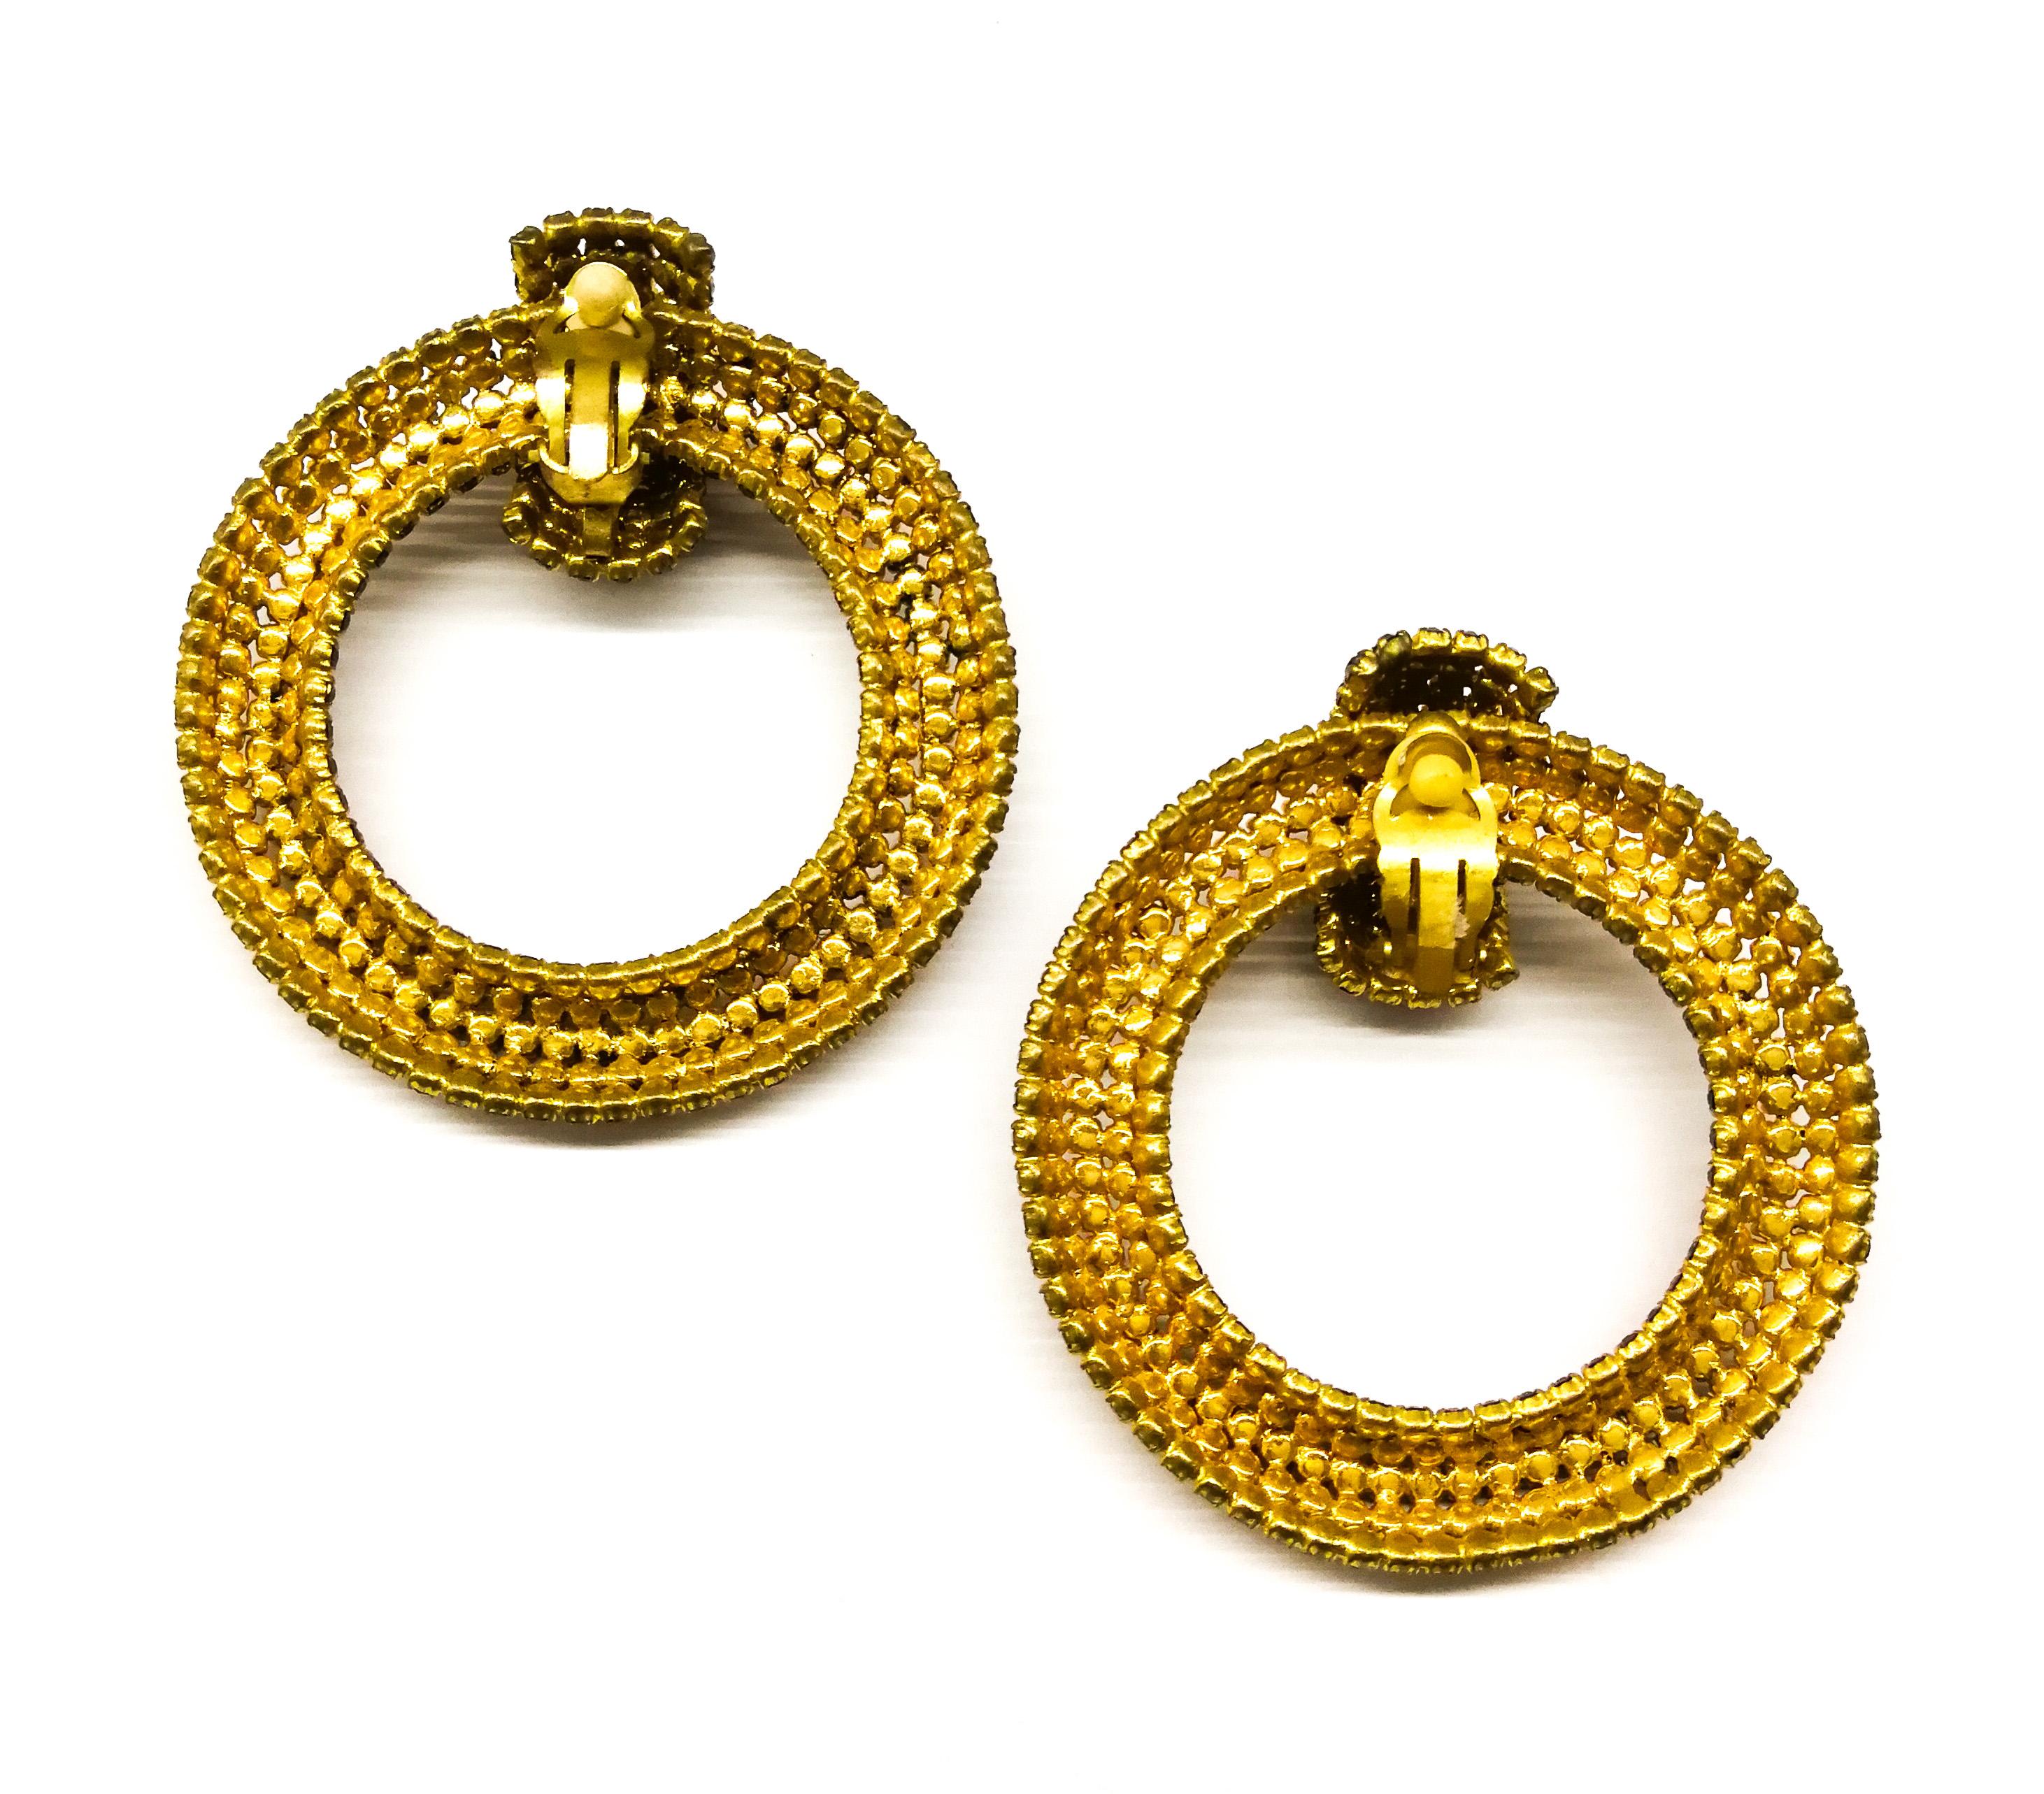 Very stylish and highly typical of Roger Jean - Pierre's haute couture style, these earrings are bedecked with closely set, beautifully warm, golden pastes that light up the face. Highly unusual but typical of the French haute couture of this